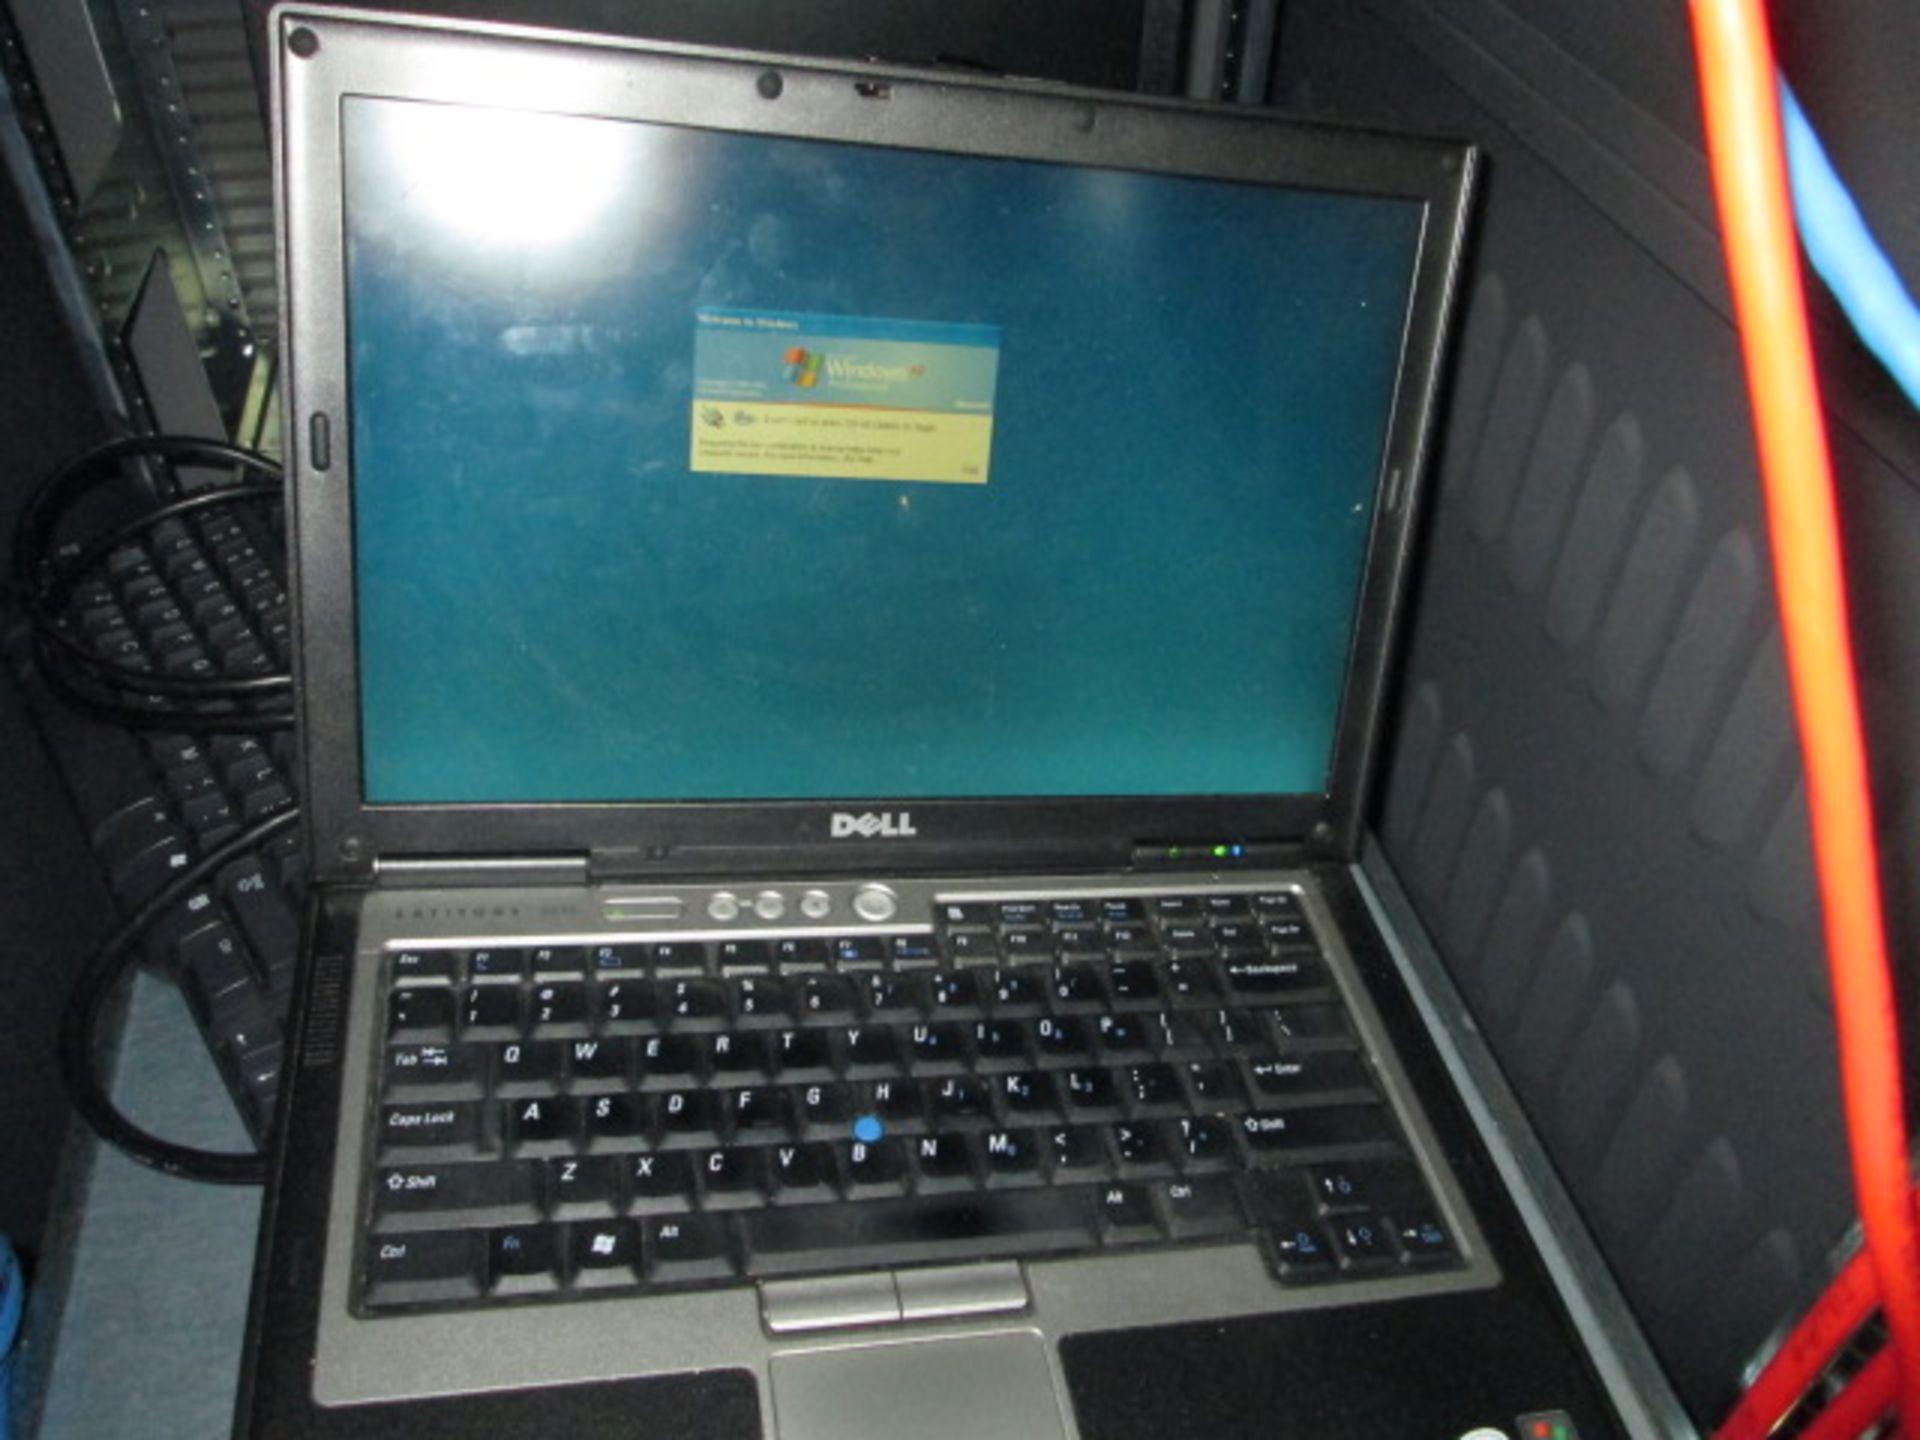 Dell Latitude D620 Laptop Computer, w/ Power Cord. **PLEASE NOTE: Only Available for Pickup on 9/